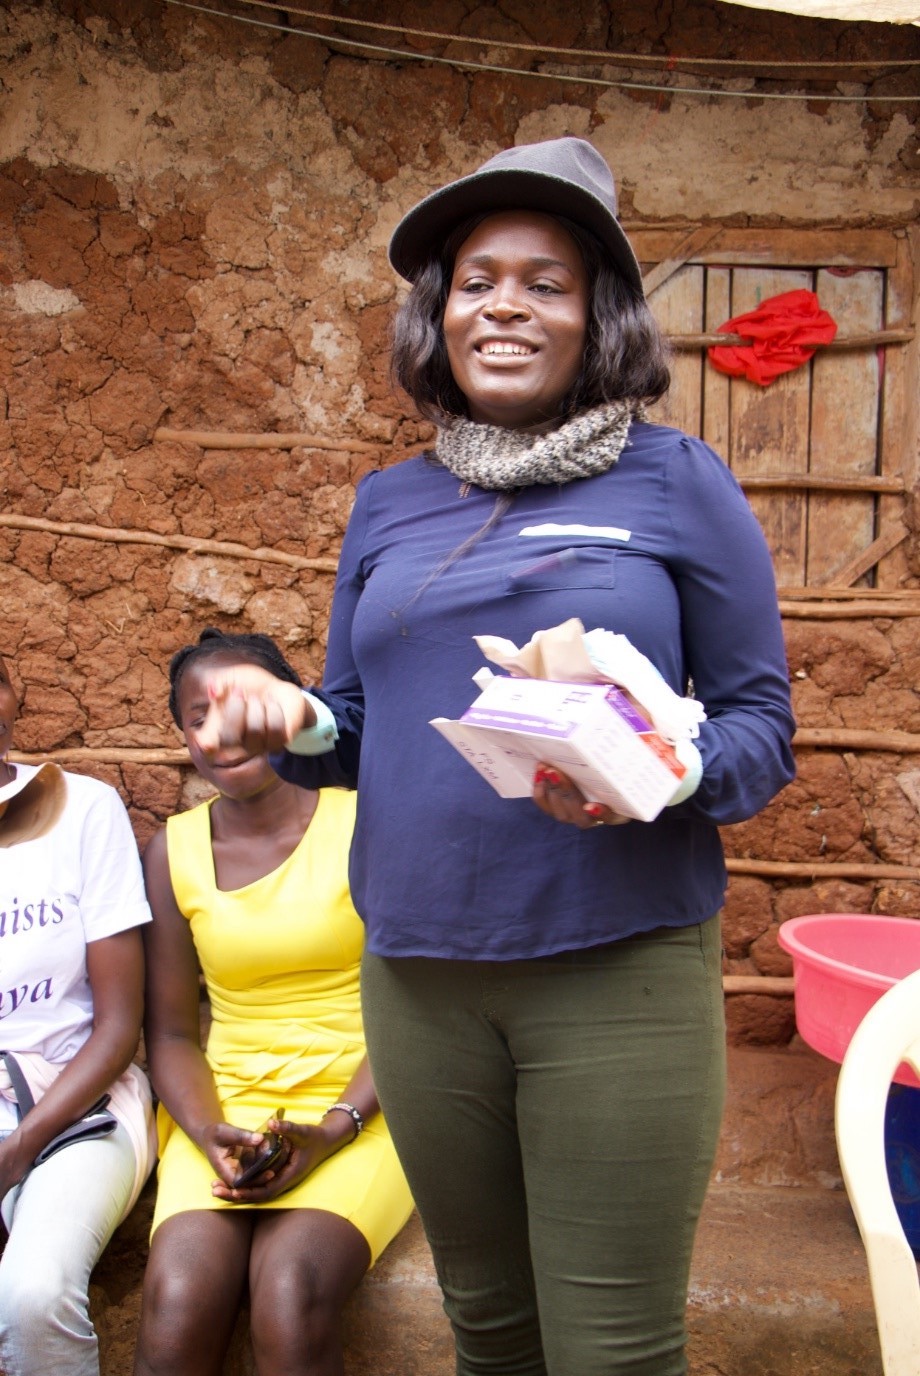 Editar Ochieng during one of the soap making training sessions with women in Kibera